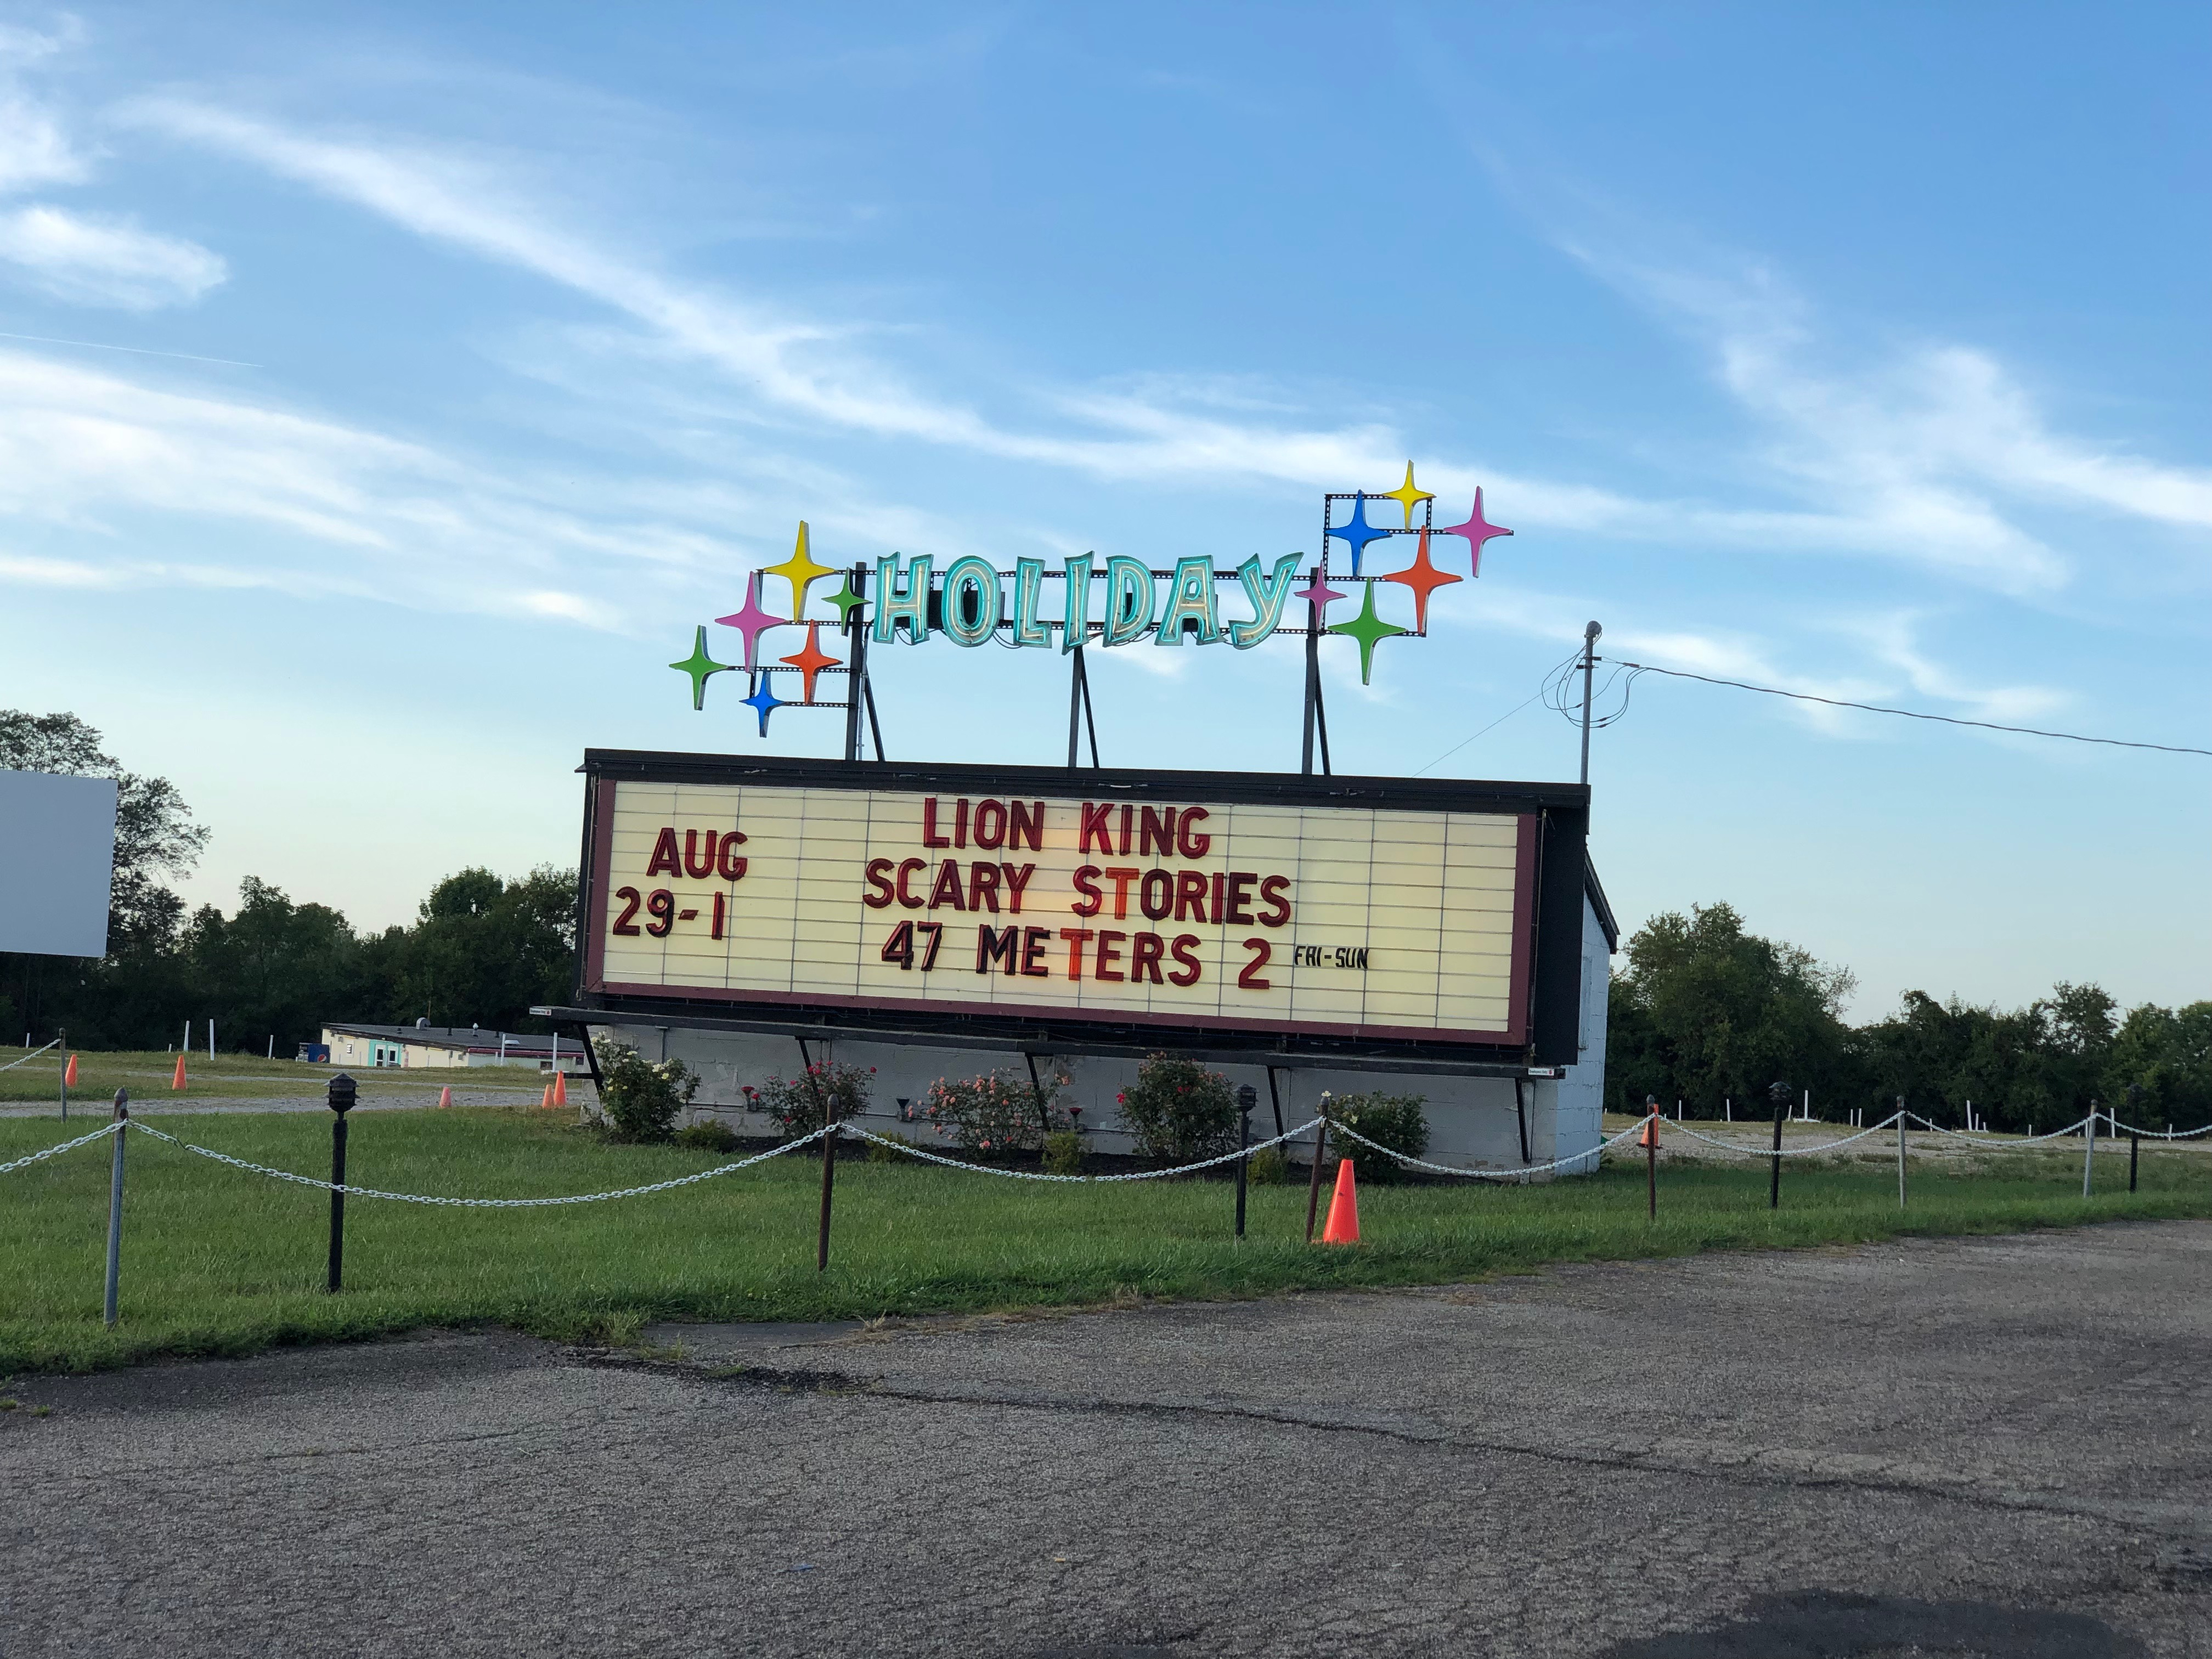 This Butler County drive-in theatre is a fun blast from the past!